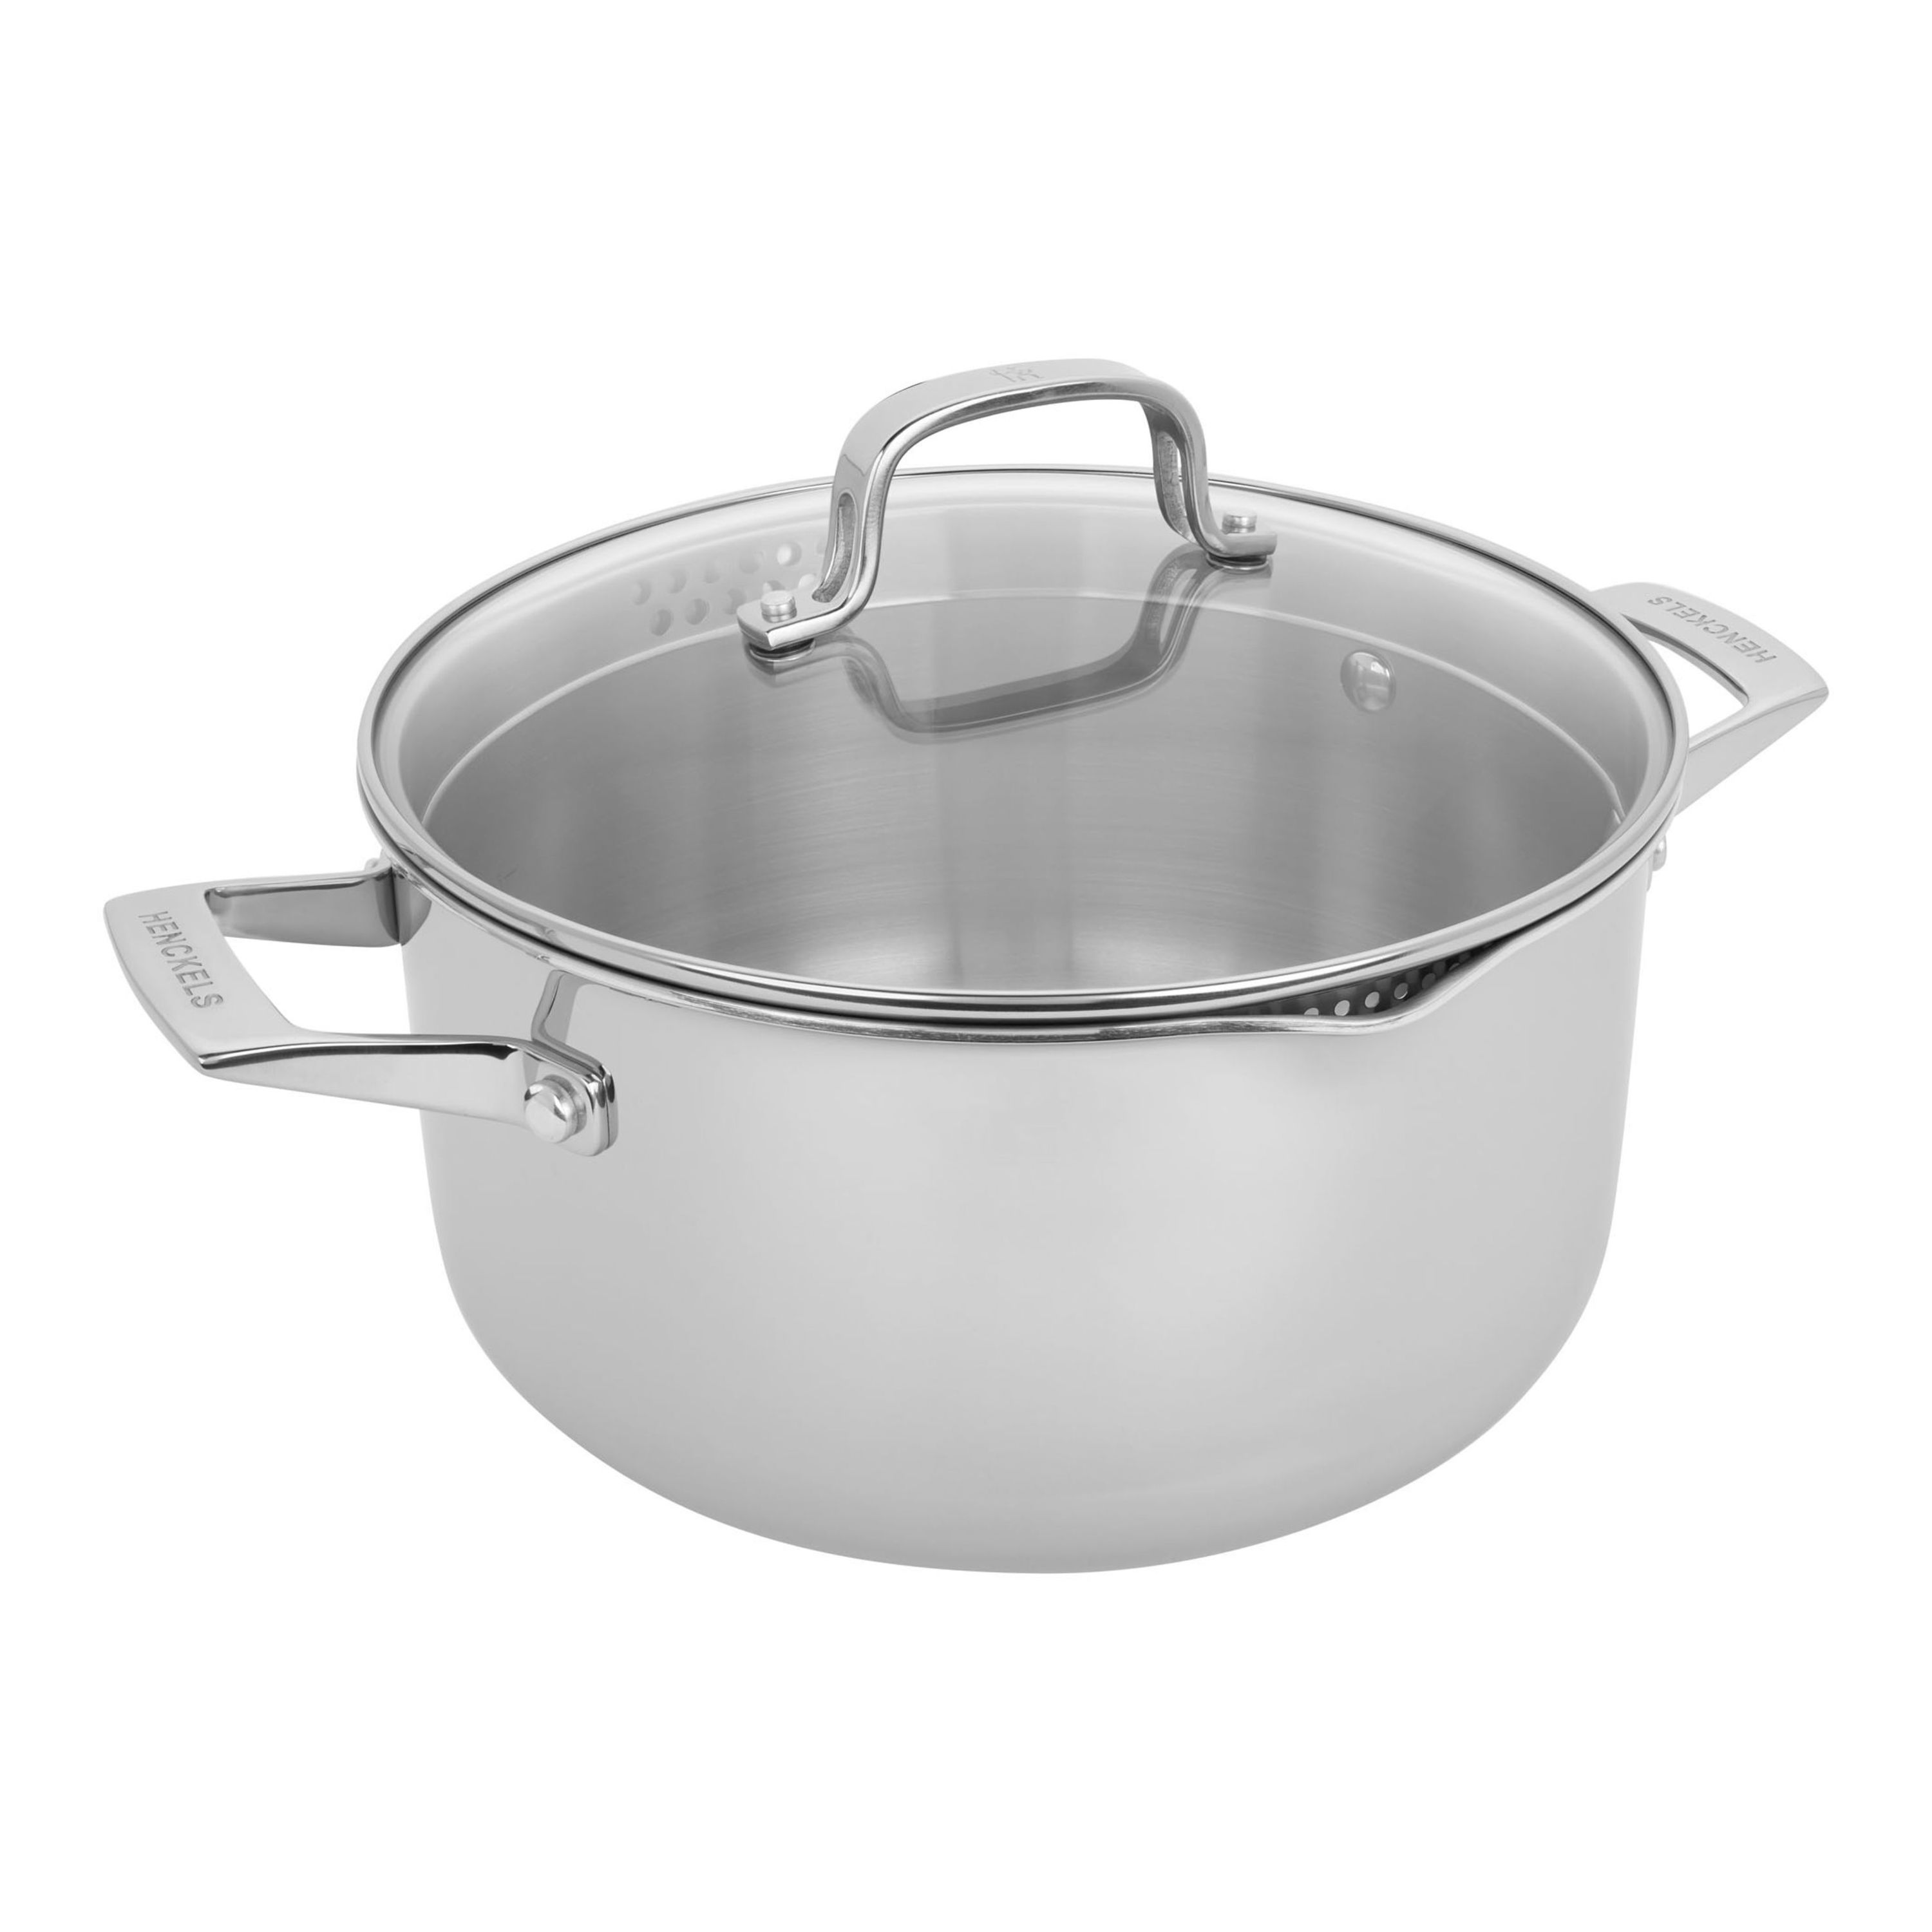 Emeril by All-Clad Pro-Clad 4-Quart Saute Pan with Lid 